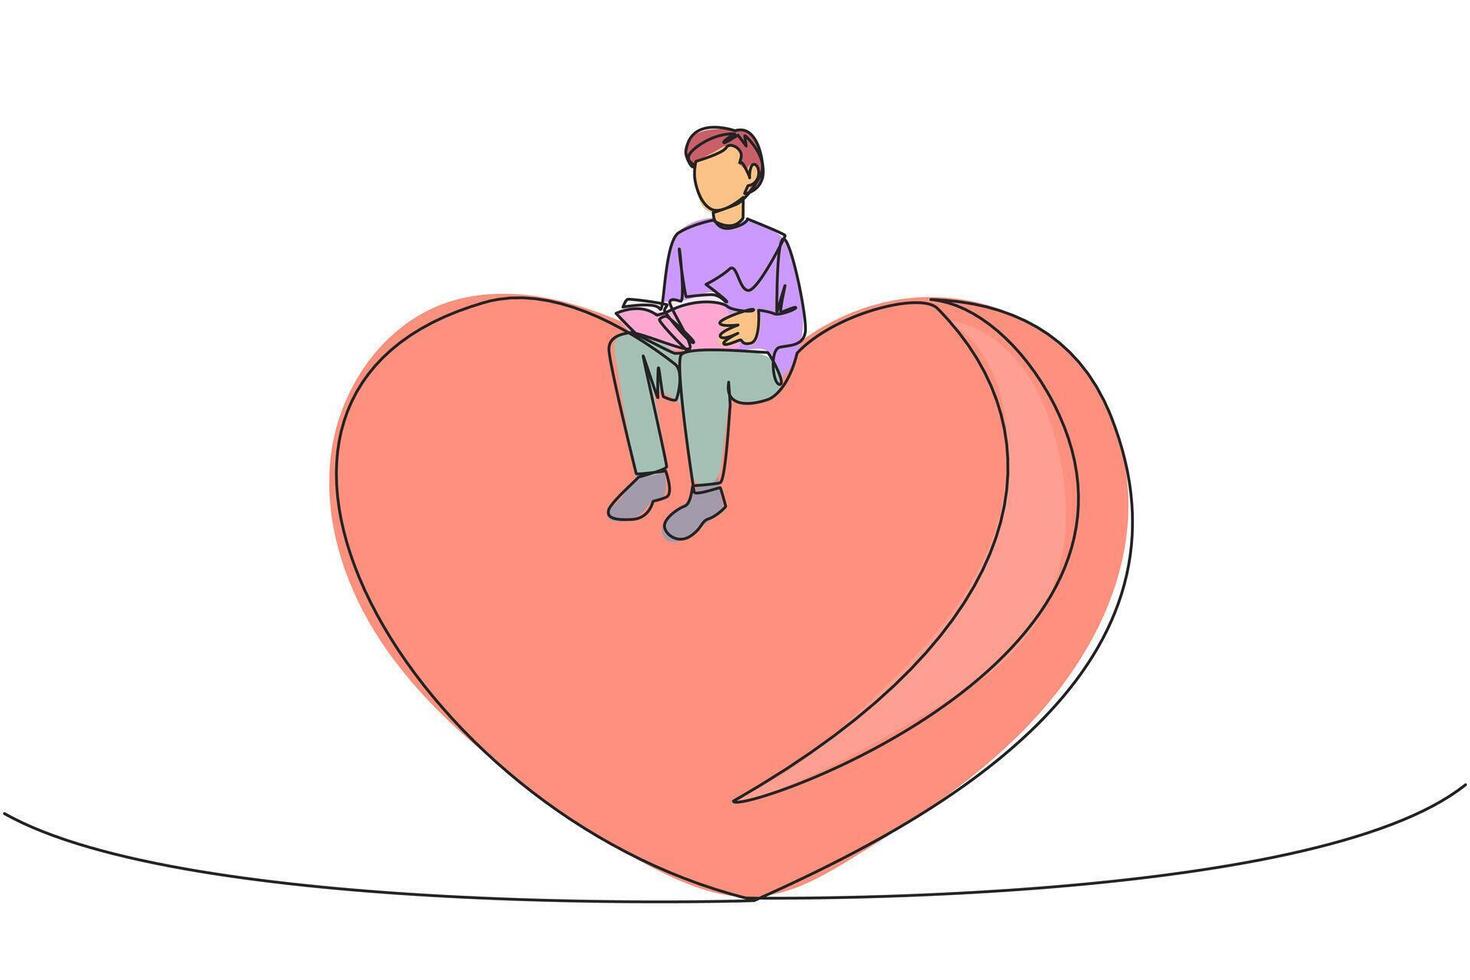 Single one line drawing man sitting on big heart. Reading the romantic fiction books. Enjoy the storyline. Hobby reading story books. Book festival concept. Continuous line design graphic illustration vector